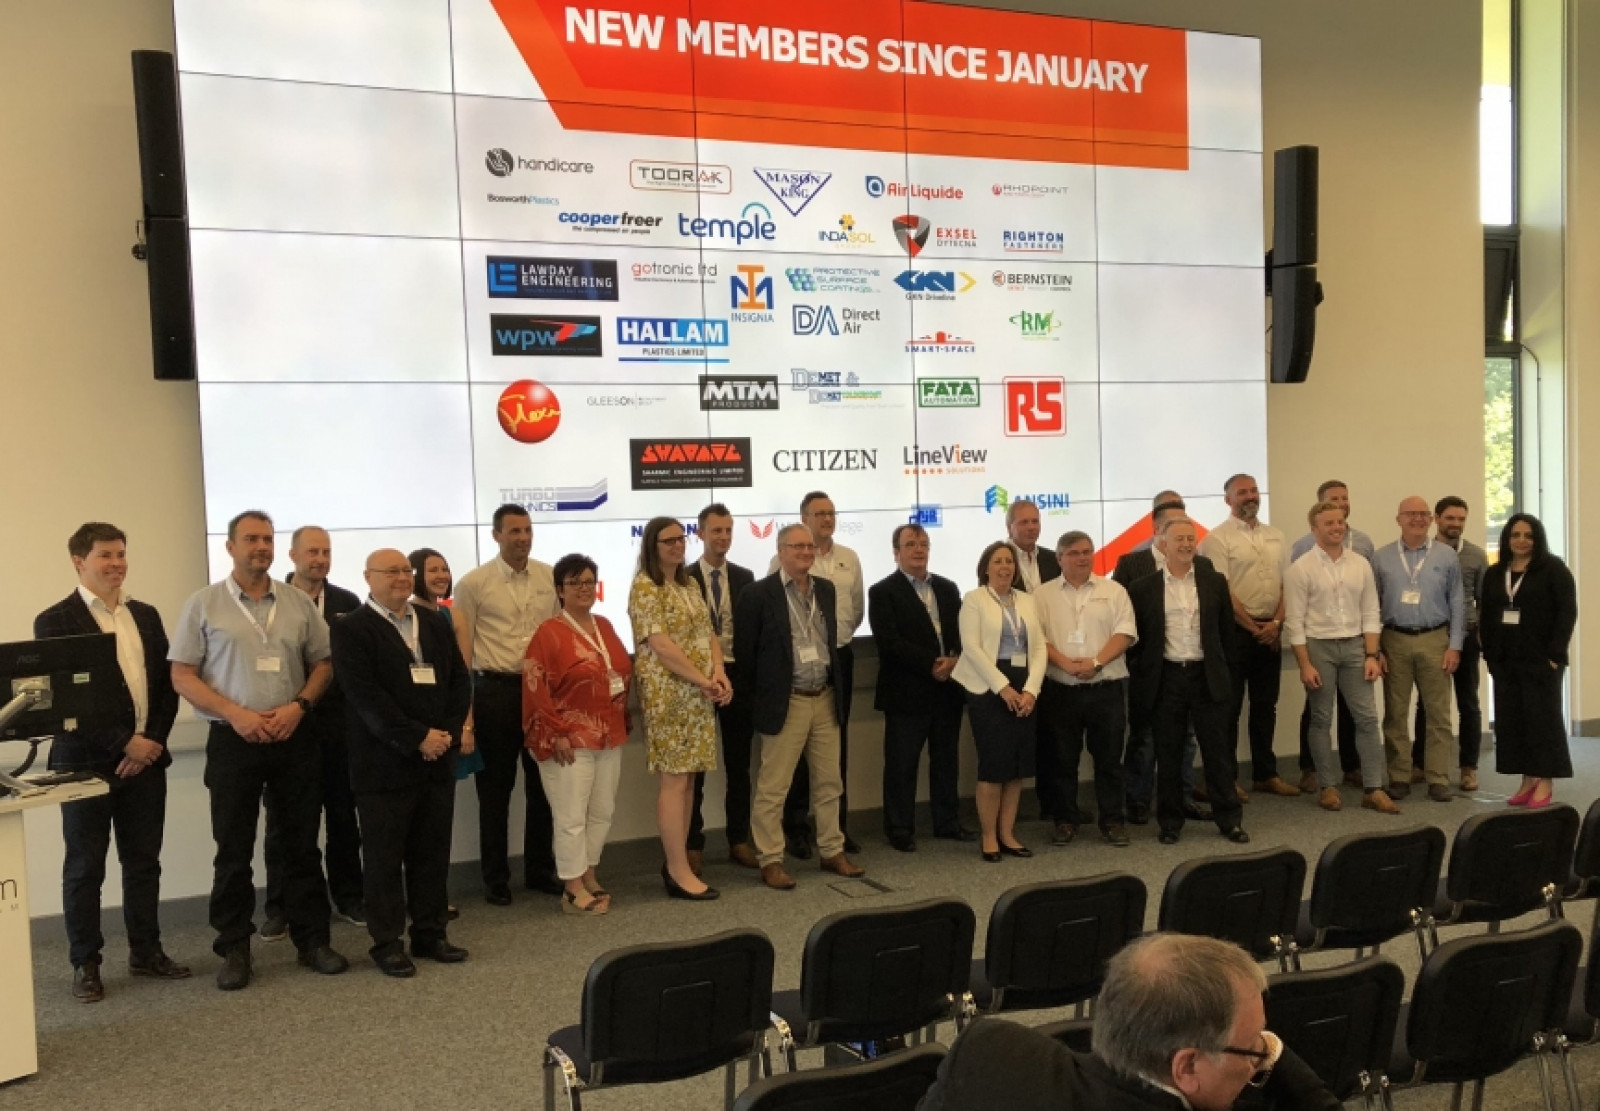 Made in the Midlands welcomes new members